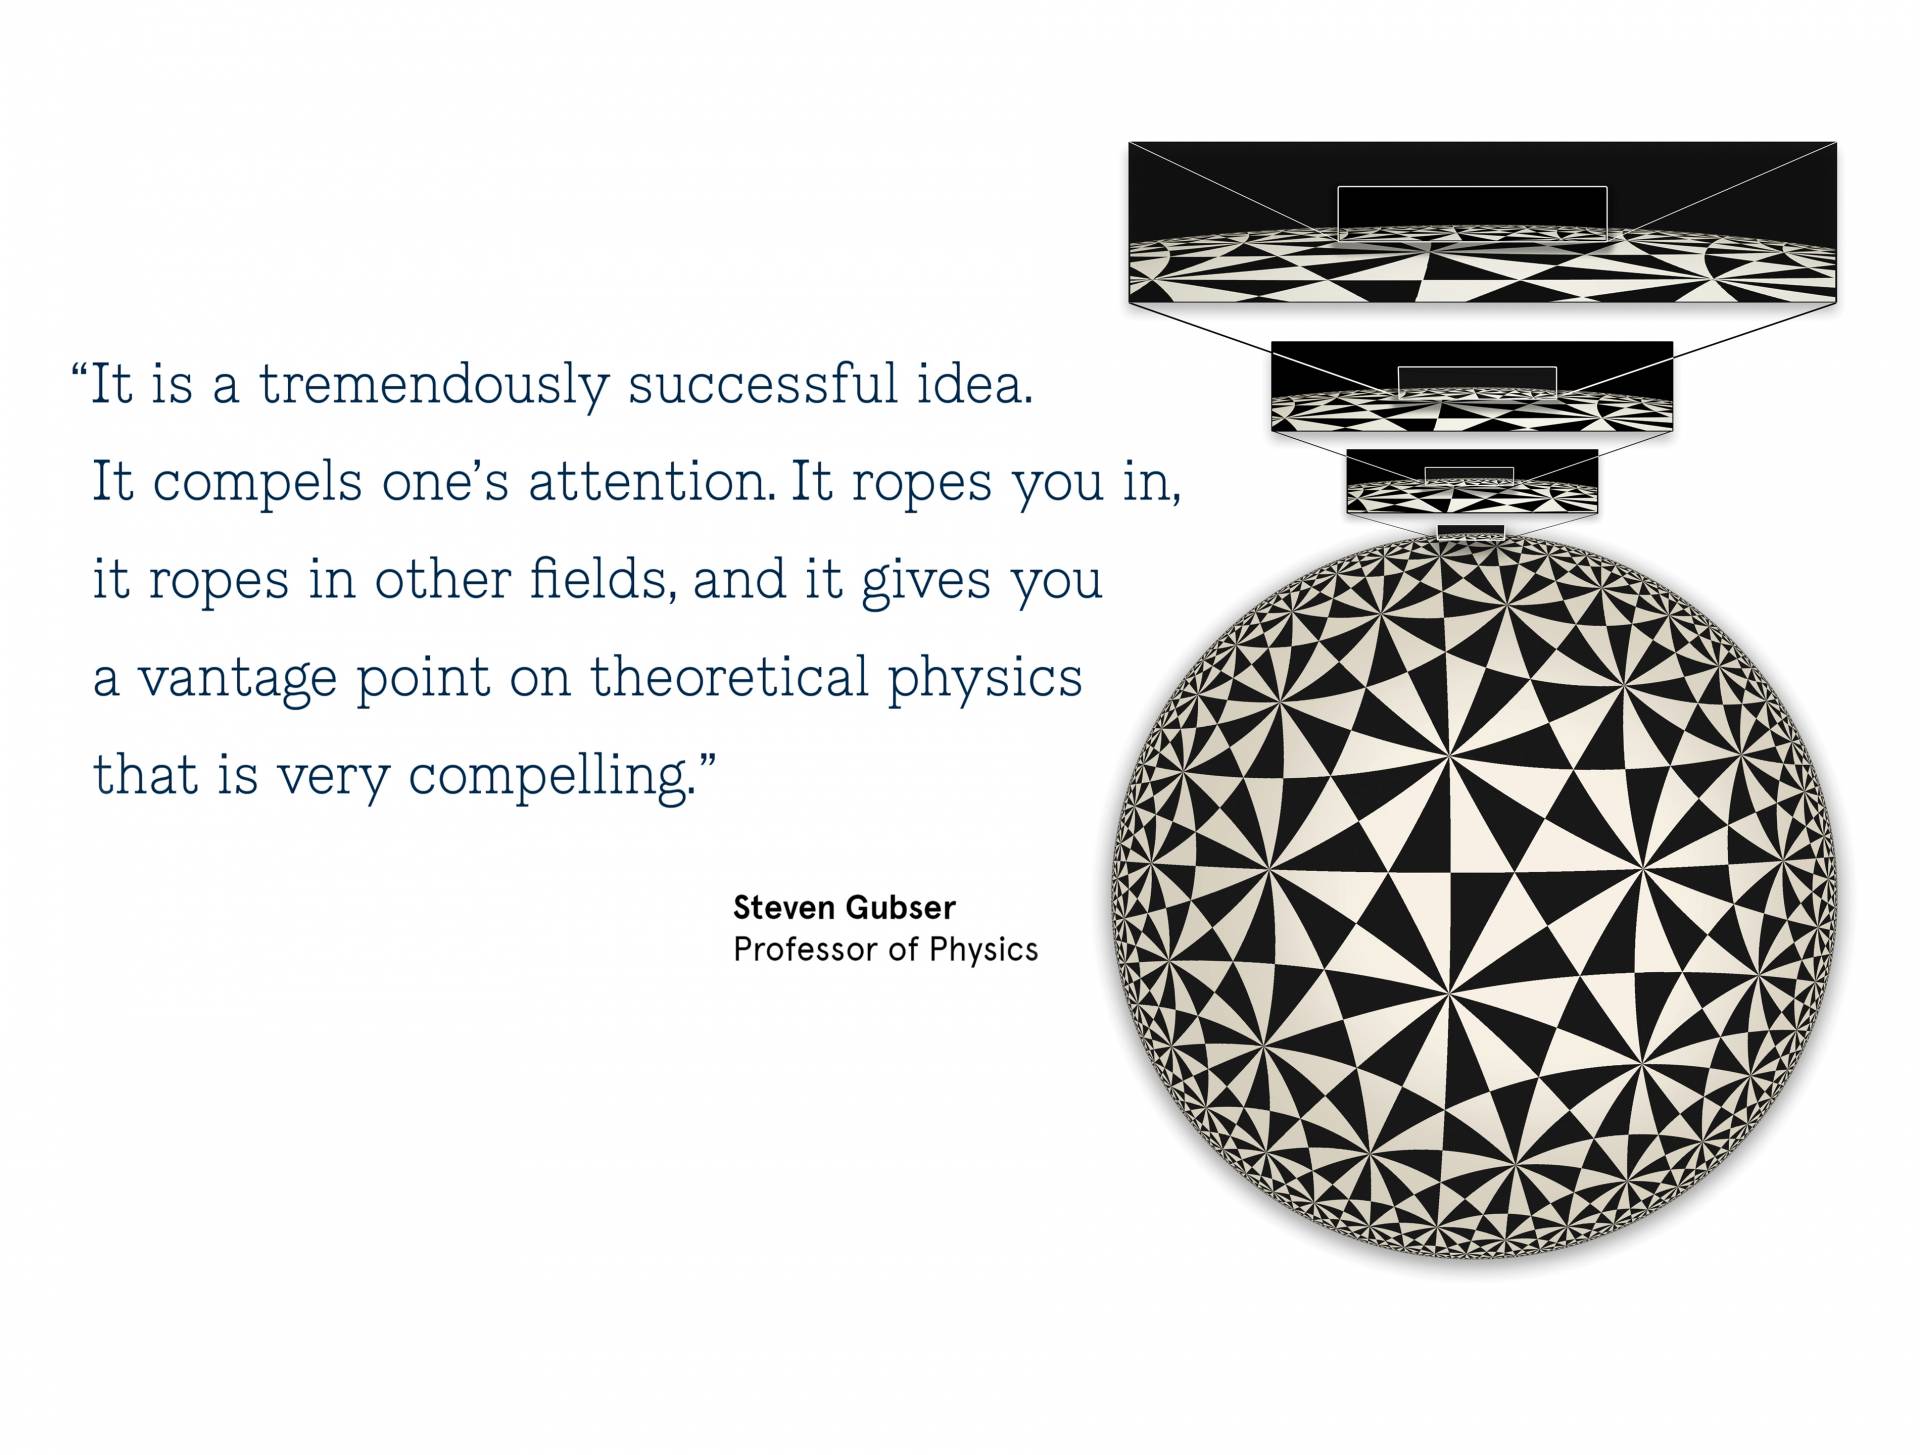 Conceptual art with a quote from Steven Gubser, Professor of Physics: “It is a tremendously successful idea. It compels one’s attention. It ropes you in,  	it ropes in other fields, and it gives you a vantage point on theoretical physics that is very compelling.” 